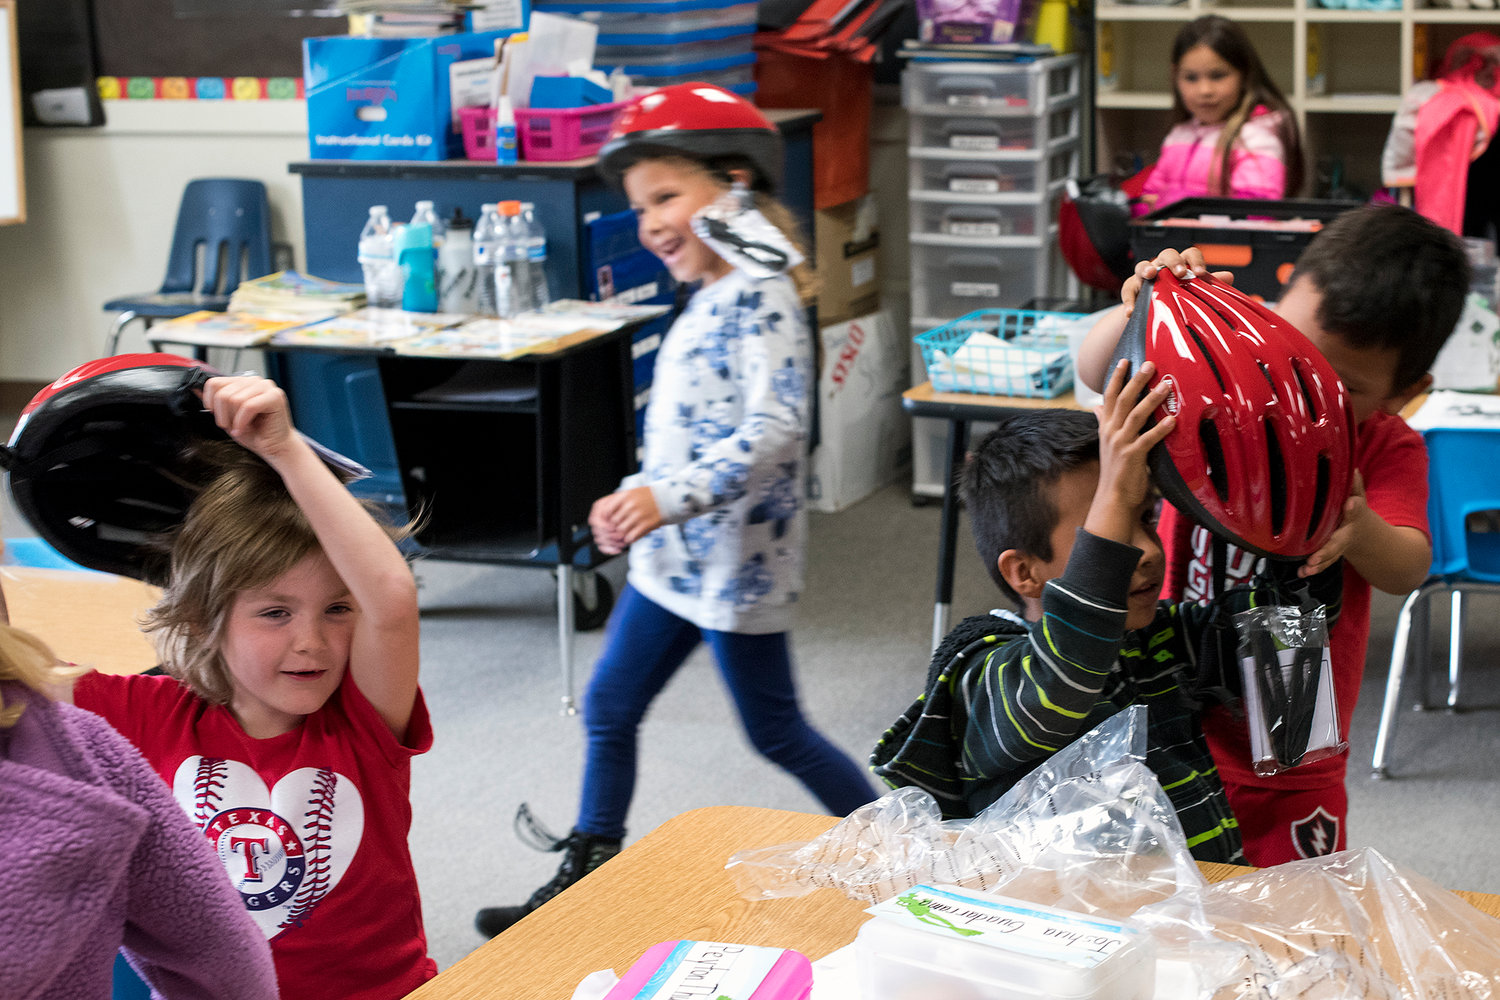 Edison Elementary student's in Alia Sherwood's kindergarten class tryout their new helmets that were provided to them on Friday by the PTO.